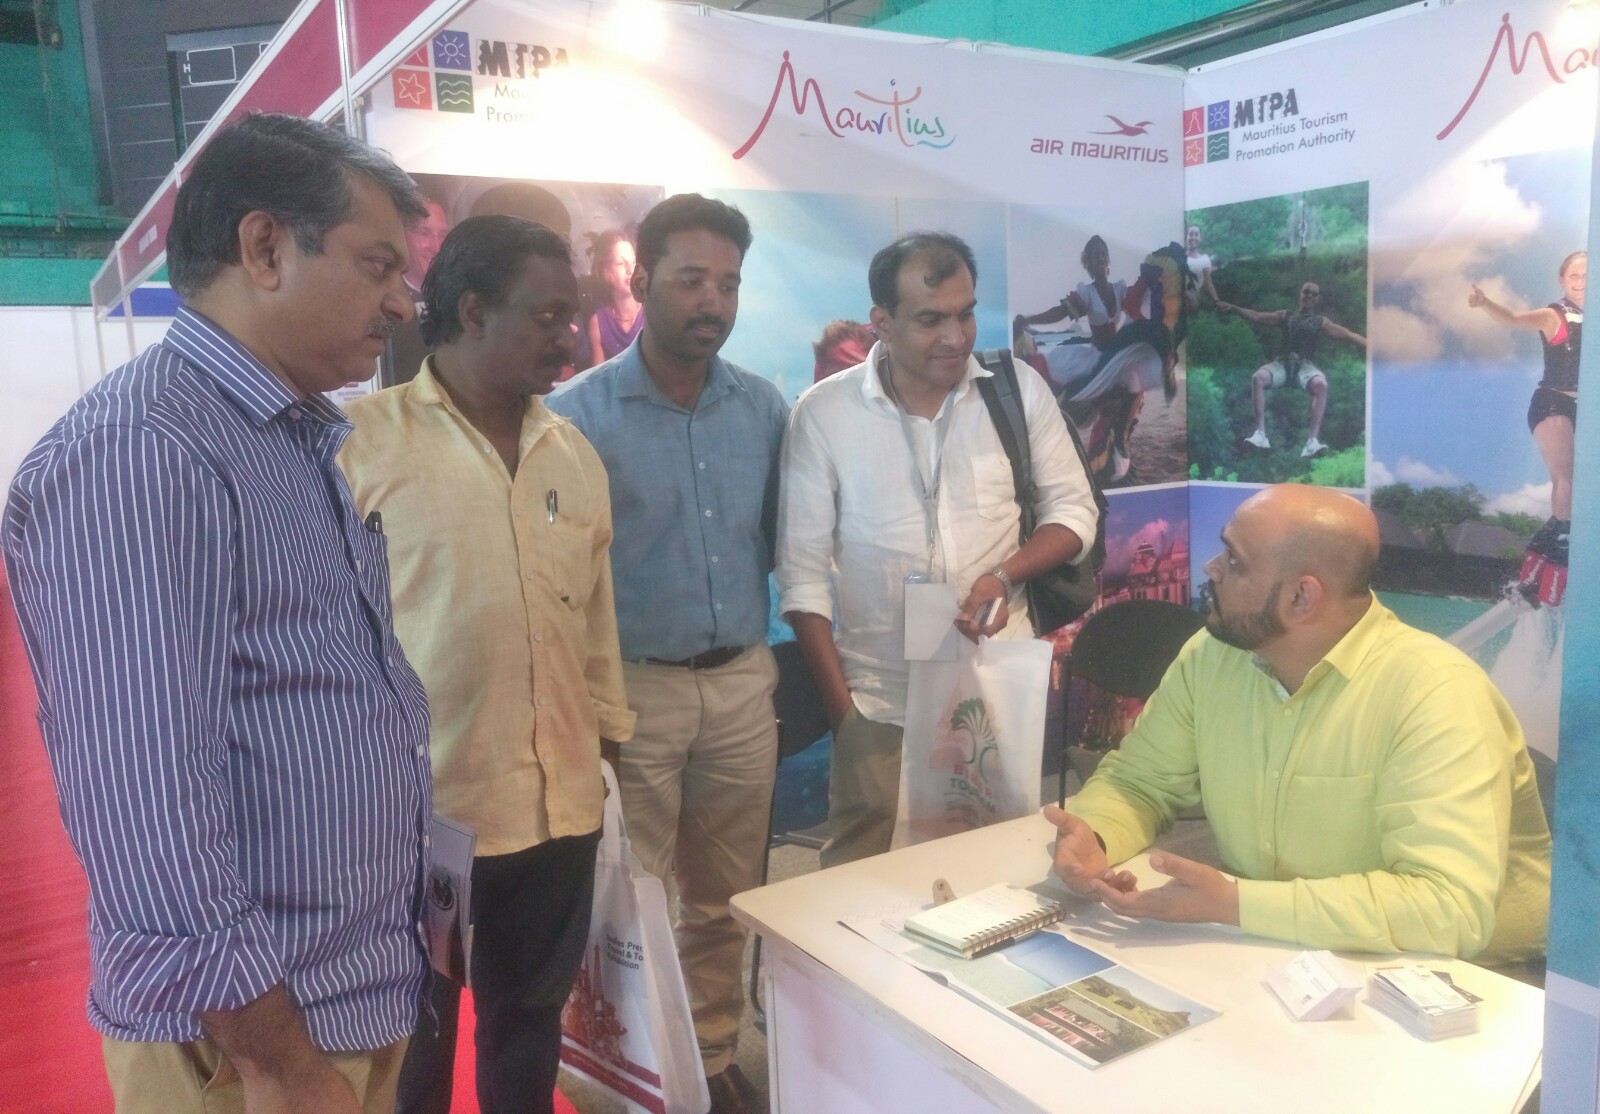 Mauritius Tourism Promotion Authority participated at the India International Travel Mart on 03rd – 05th January 2019